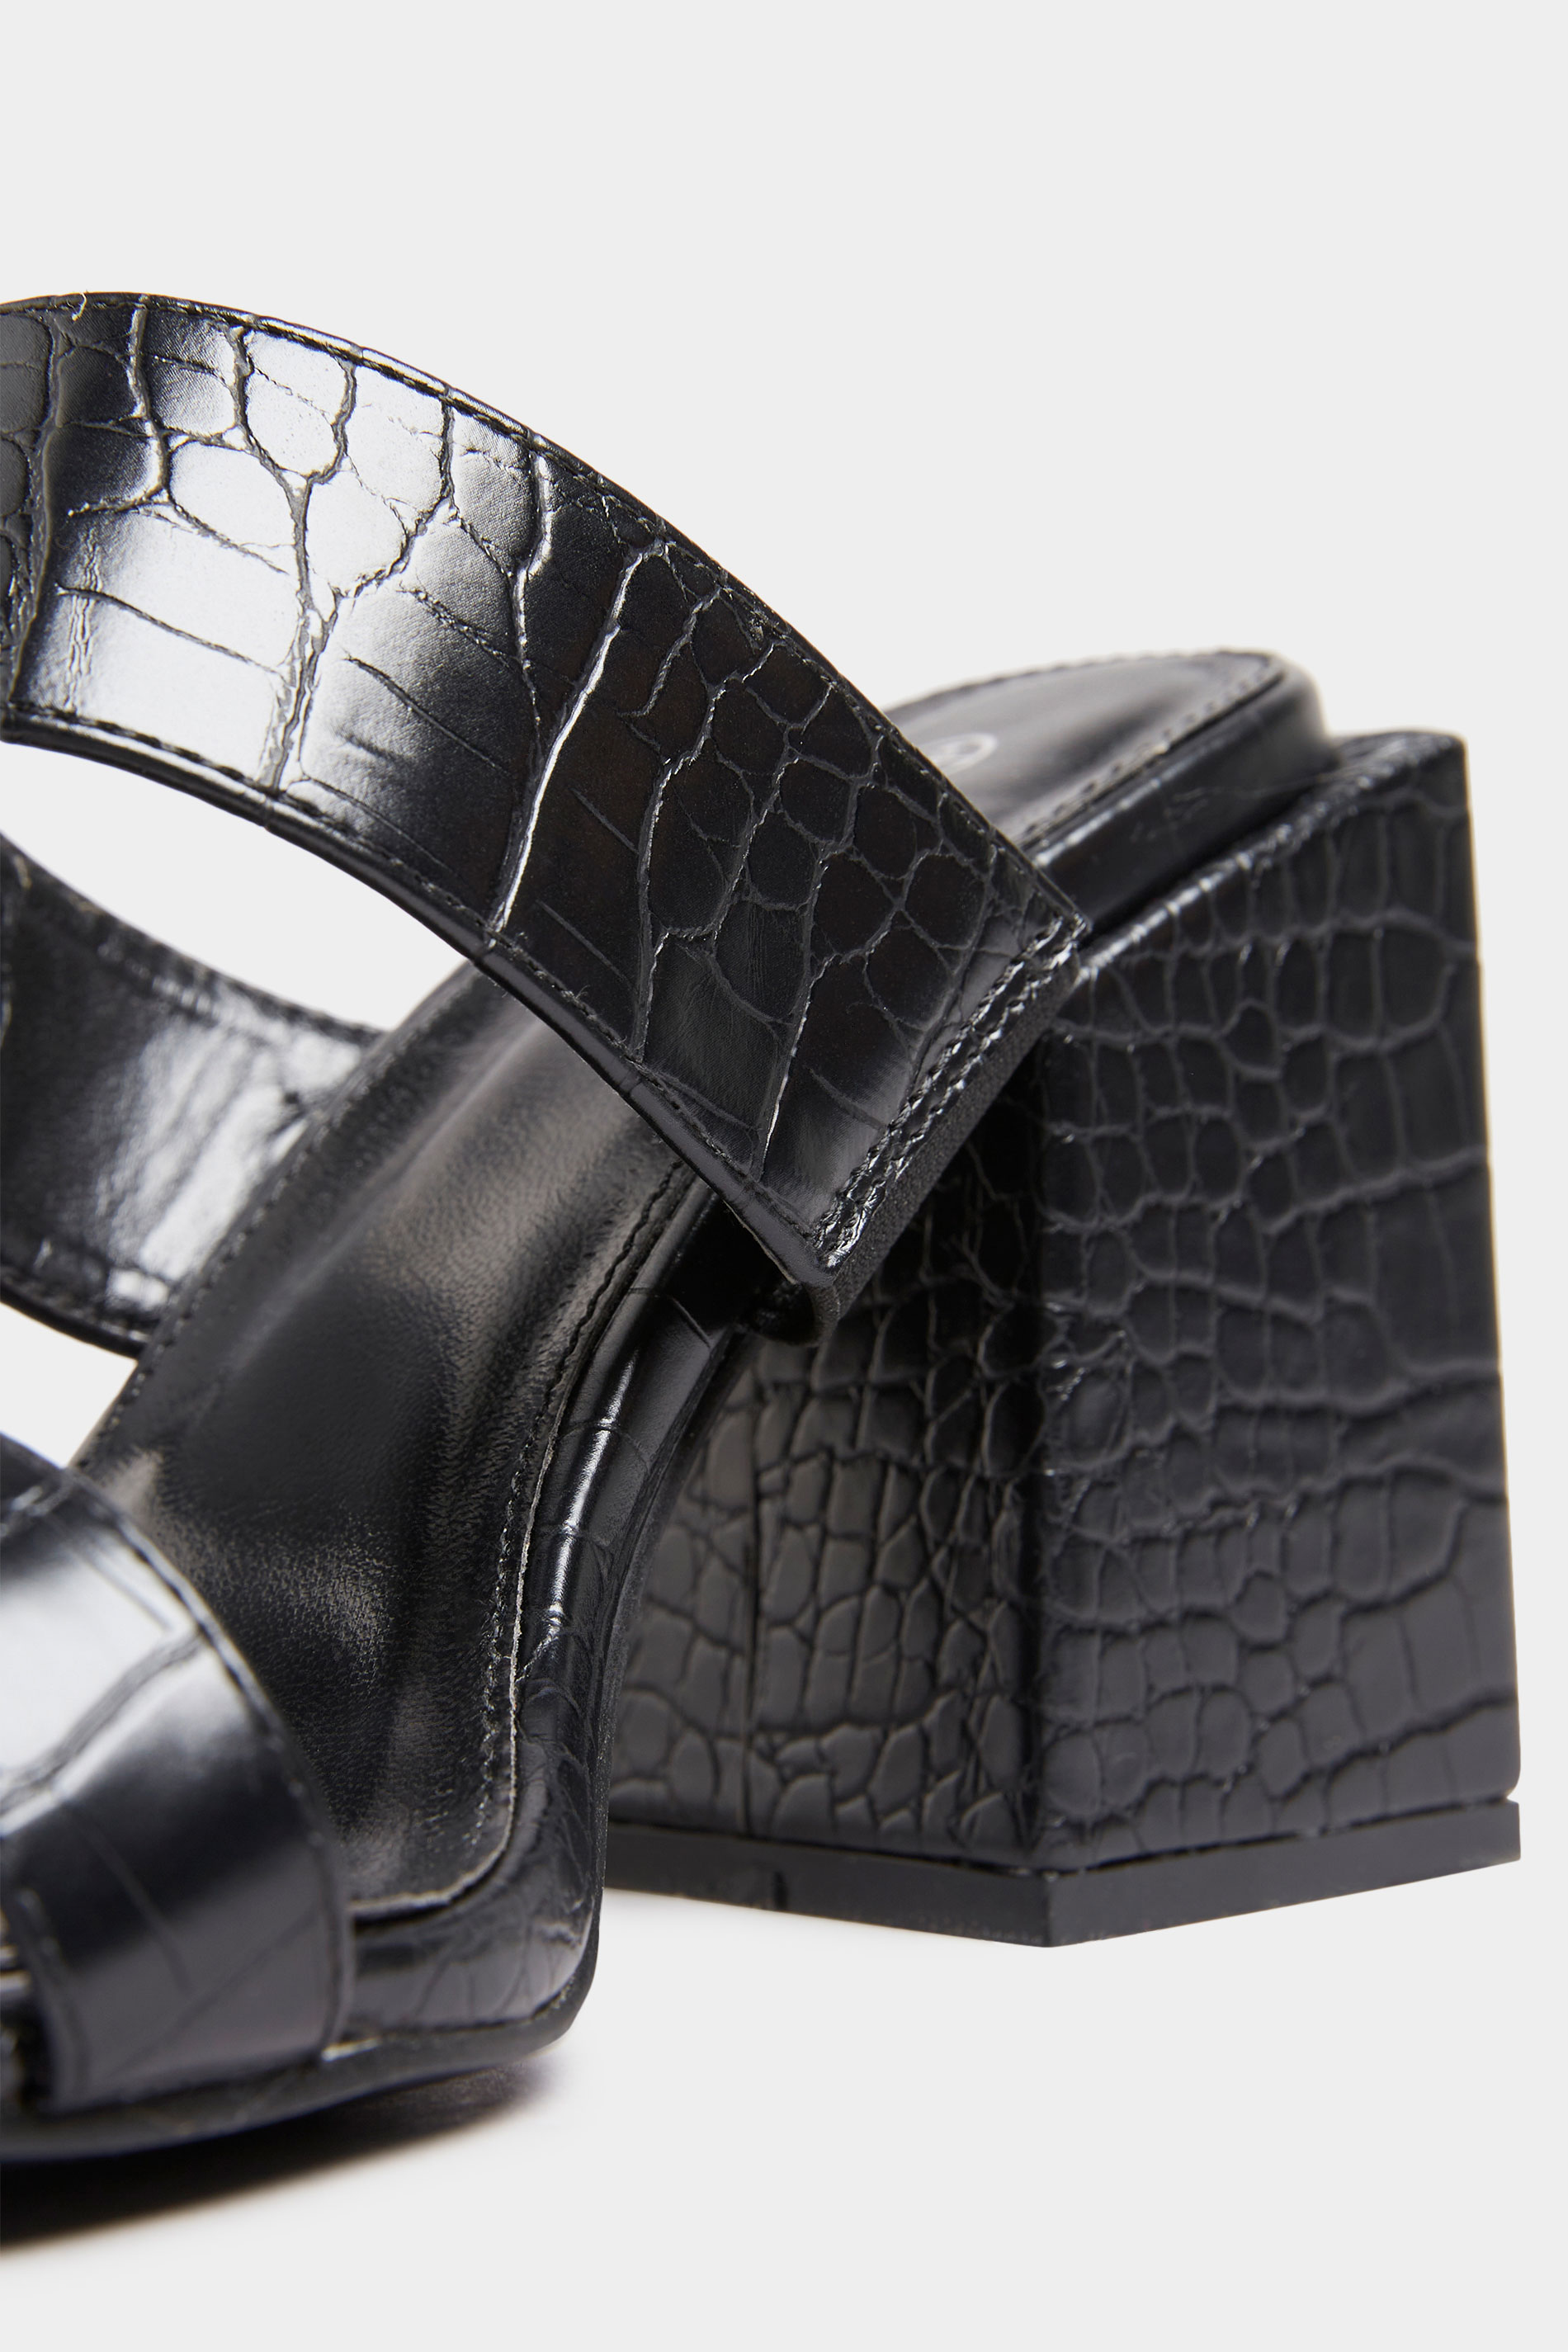 LIMITED COLLECTION Black Vegan Leather Croc Heeled Mules In Extra Wide ...